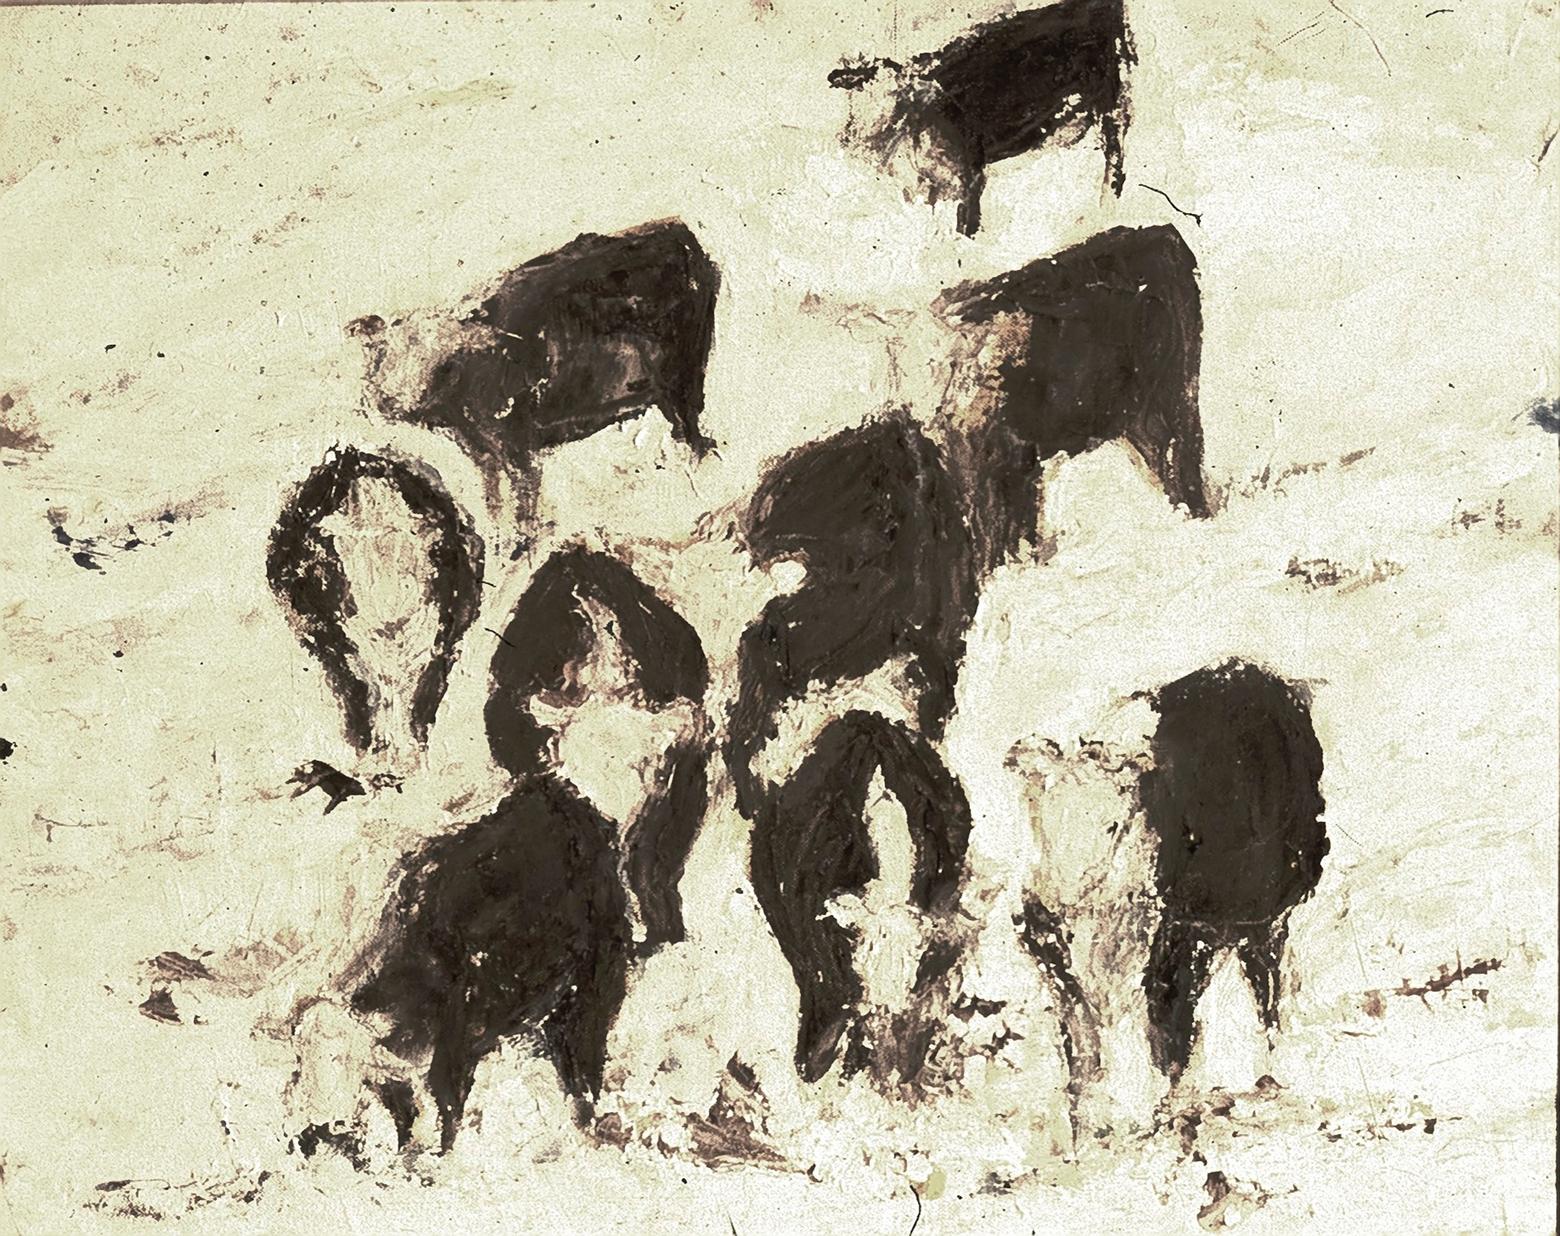 Top: "East Fiddler Creek" (1967)  by Isabelle Johnson. Just above: "Calves, Winter" (1950)  also by Johnson. Both images courtesy of the Yellowstone Art Museum